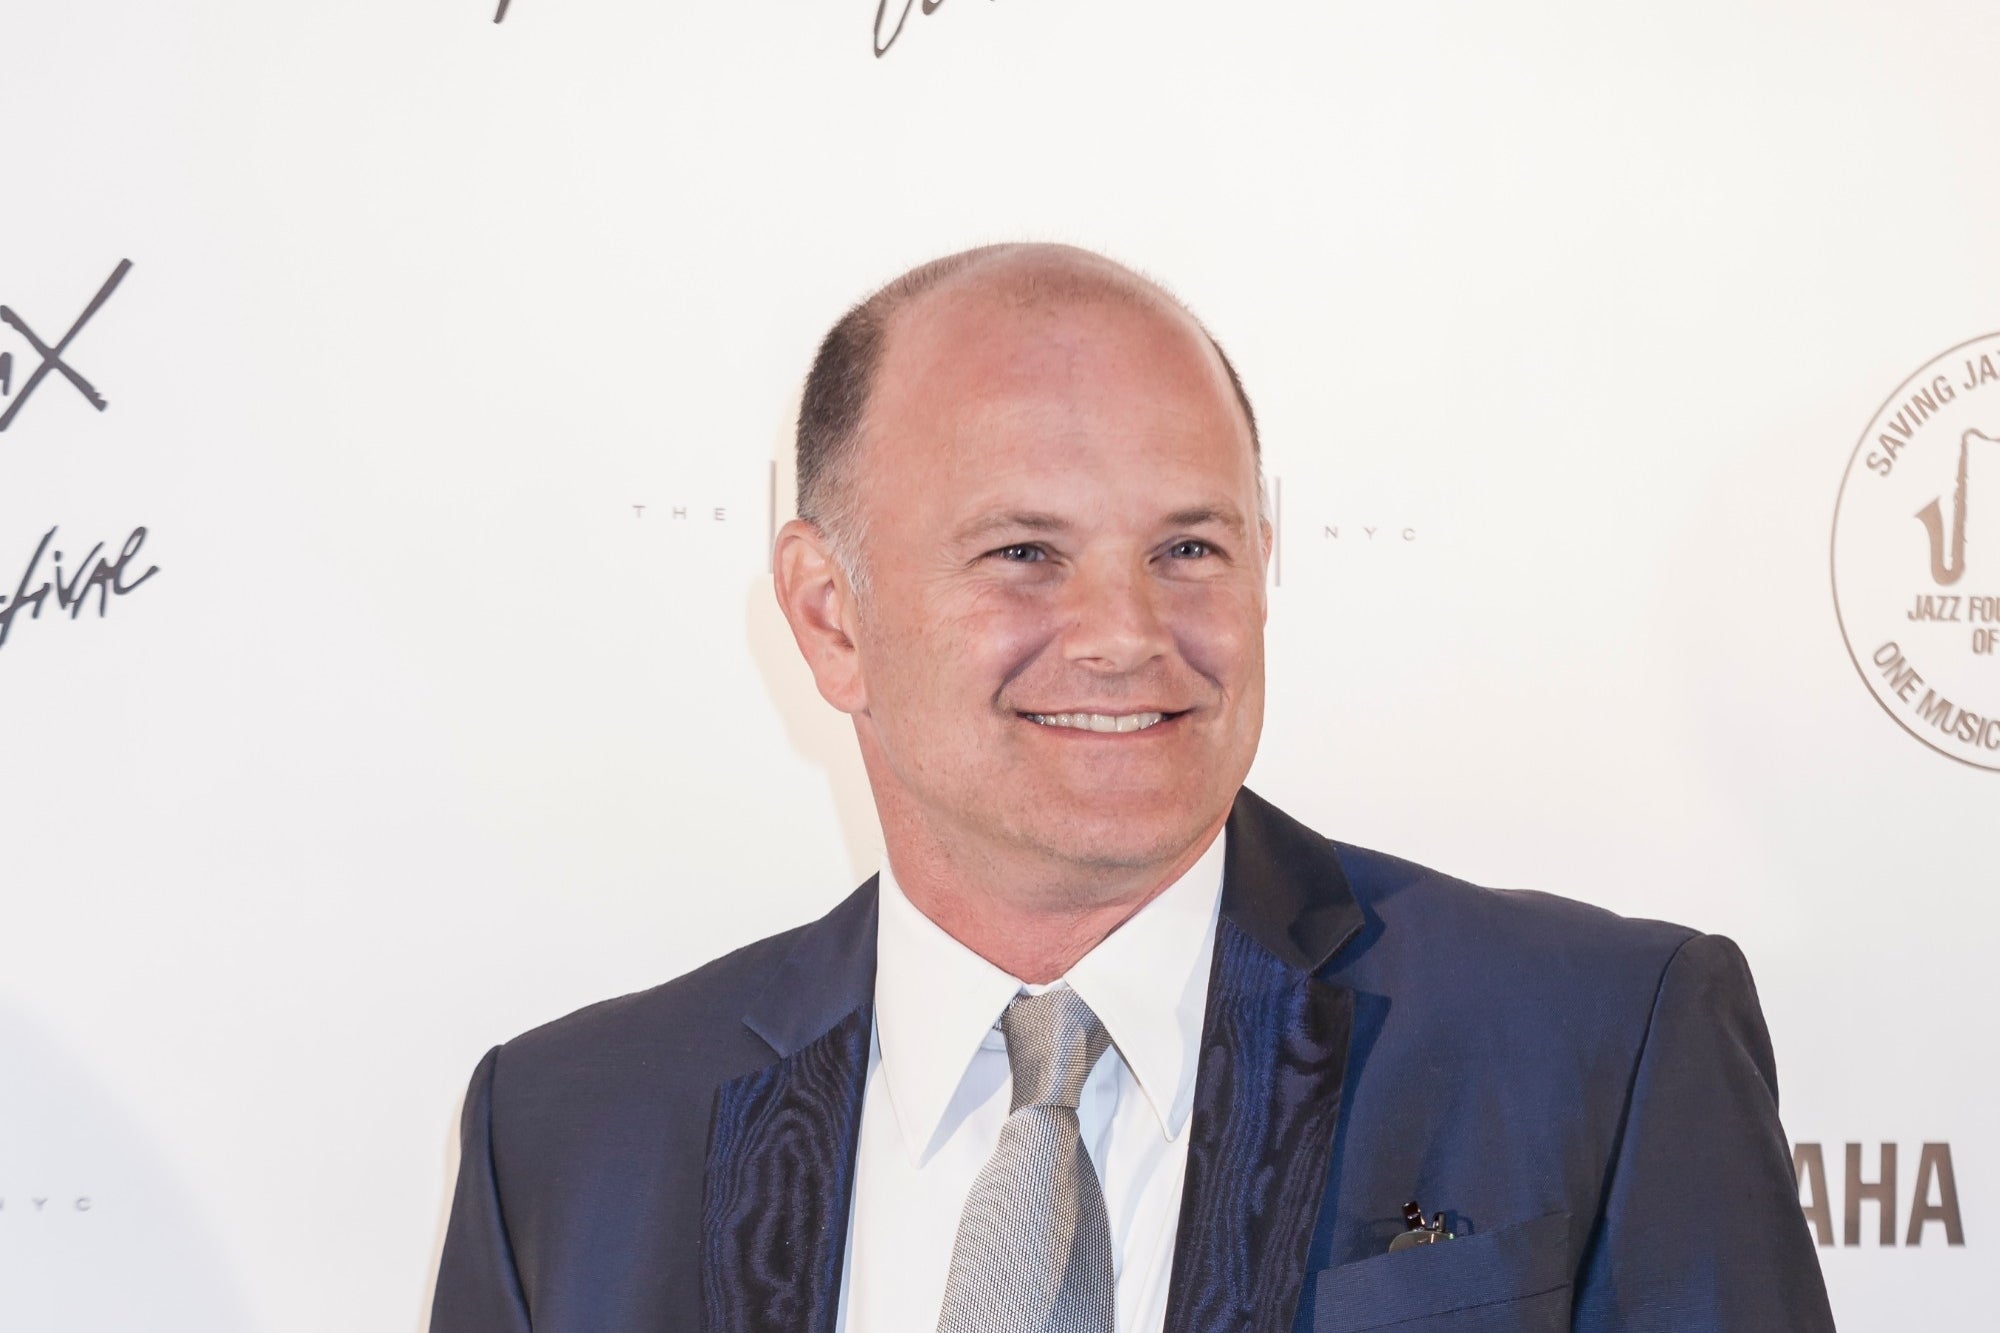 Bitcoin would reach 100,000 dollars and all companies would adopt it: Novogratz